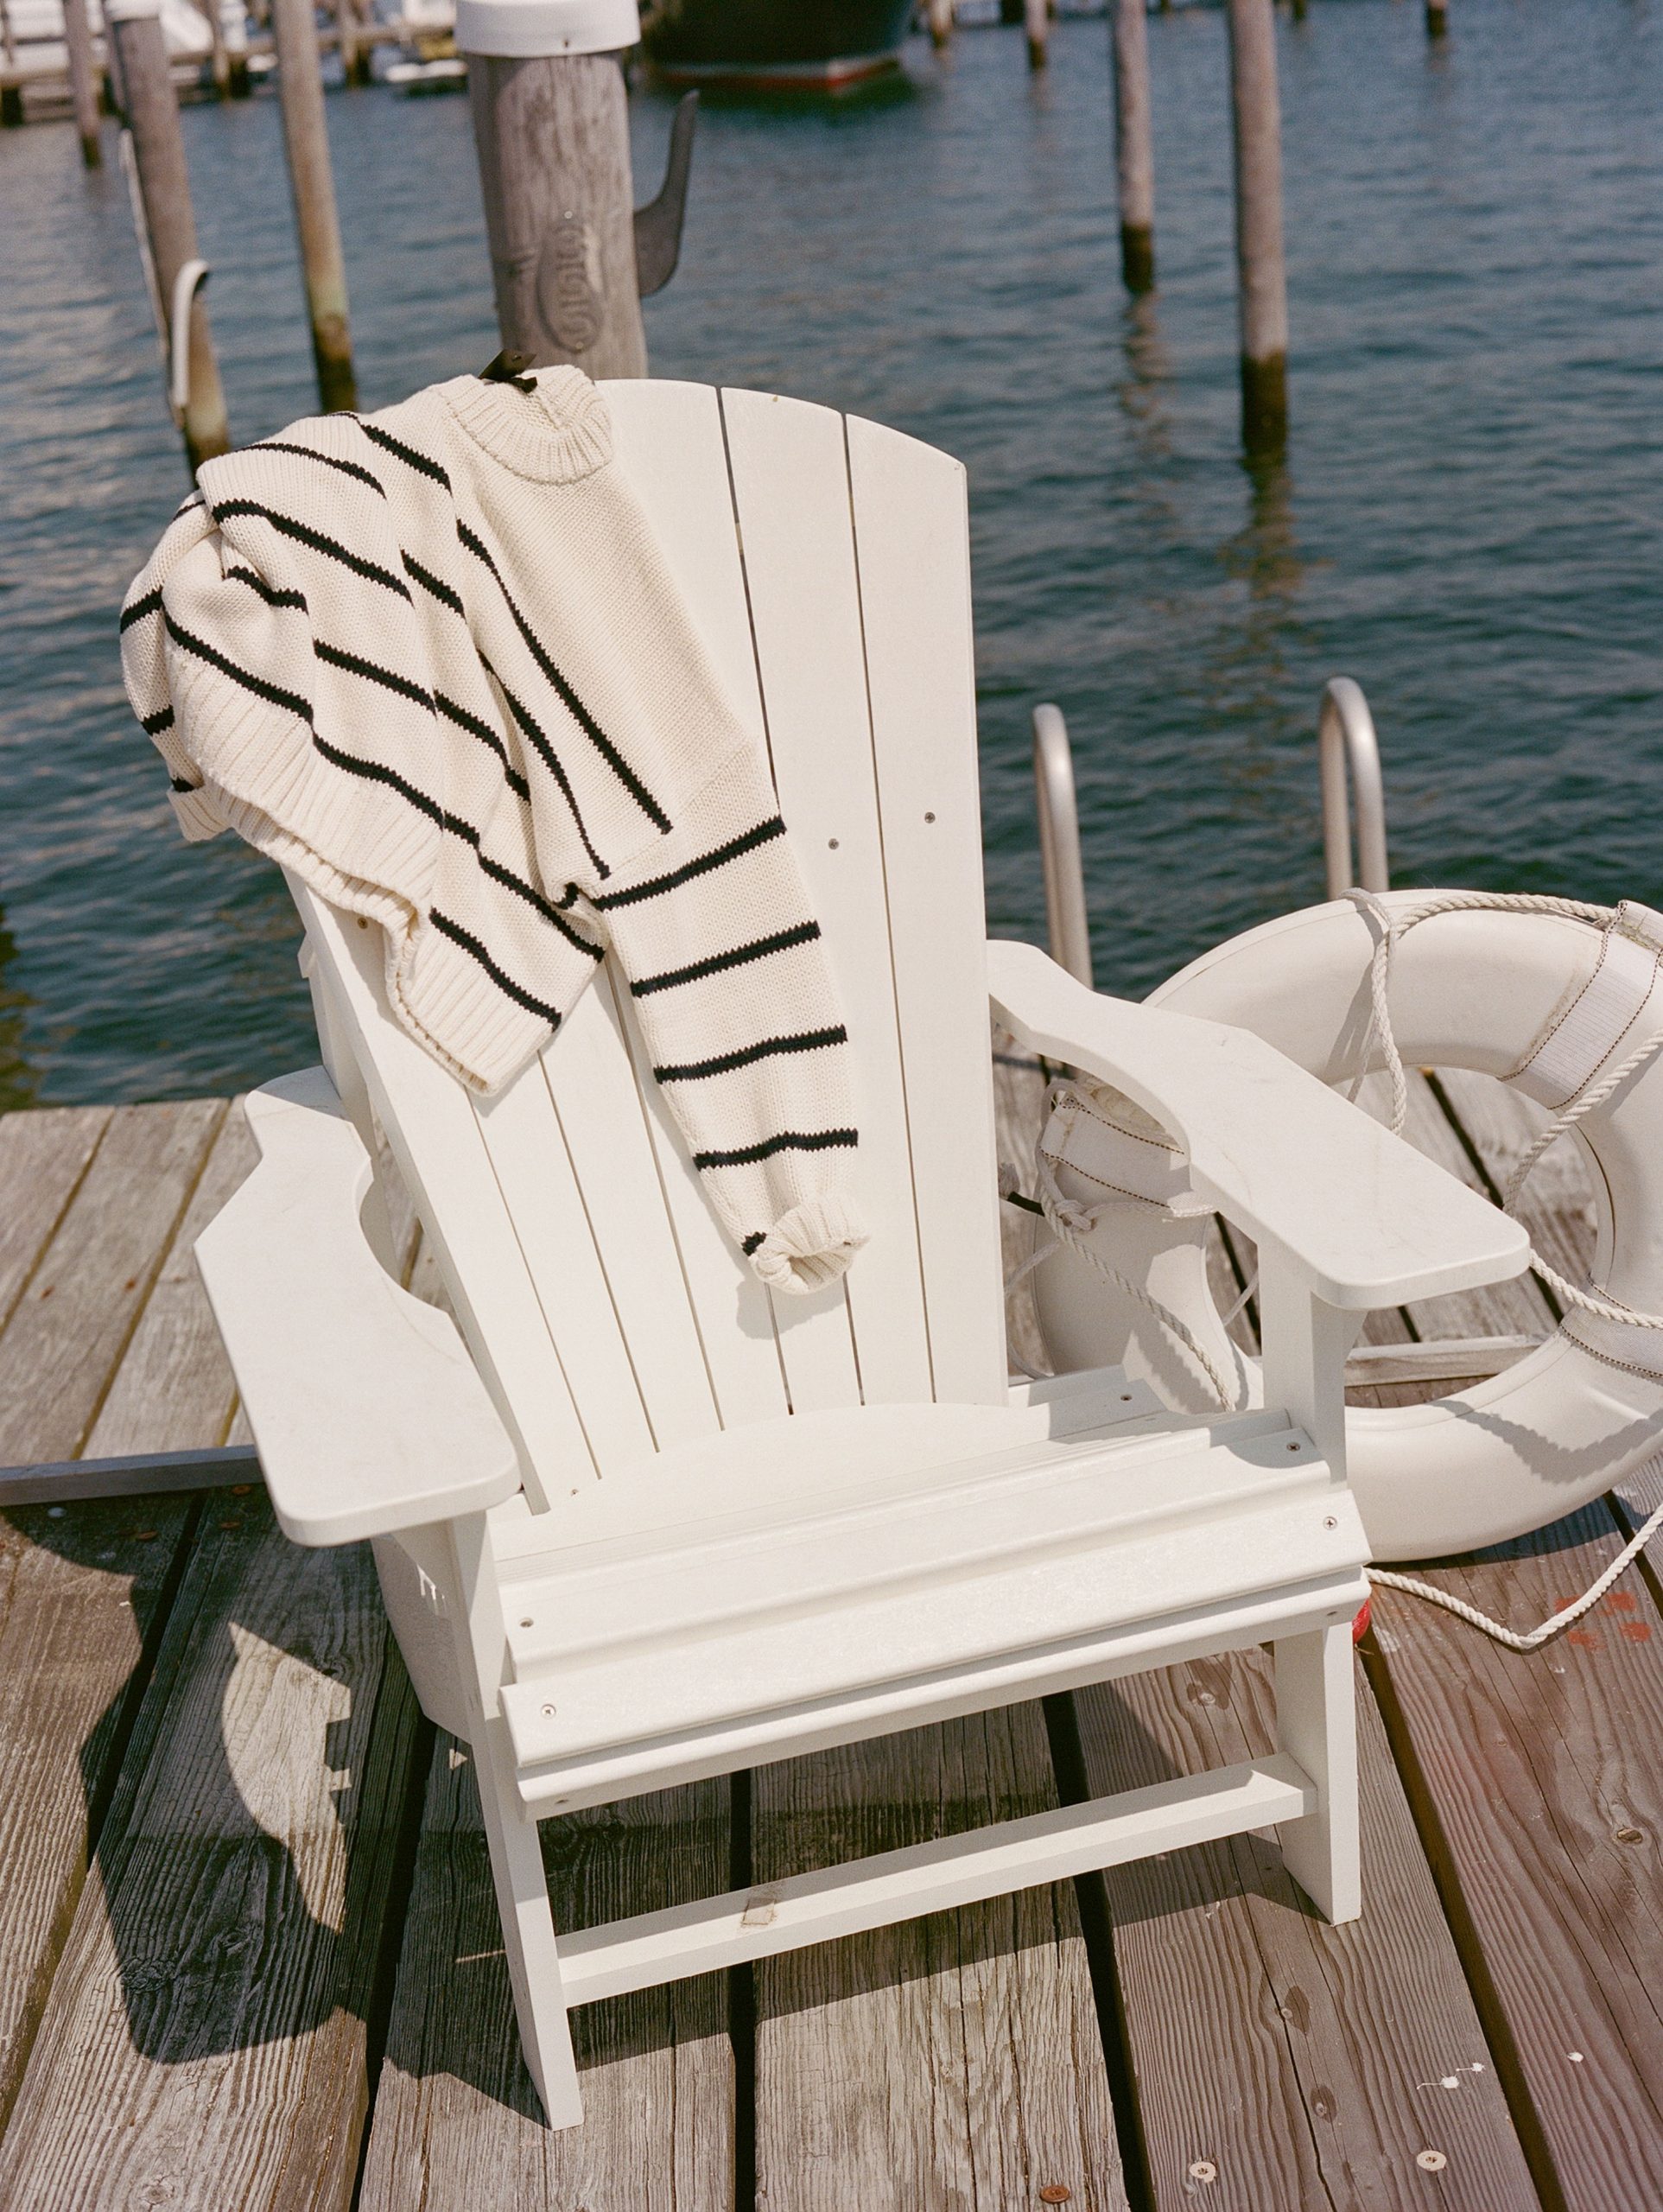 A white sweater with black lines lies on a chair at the dockyard.